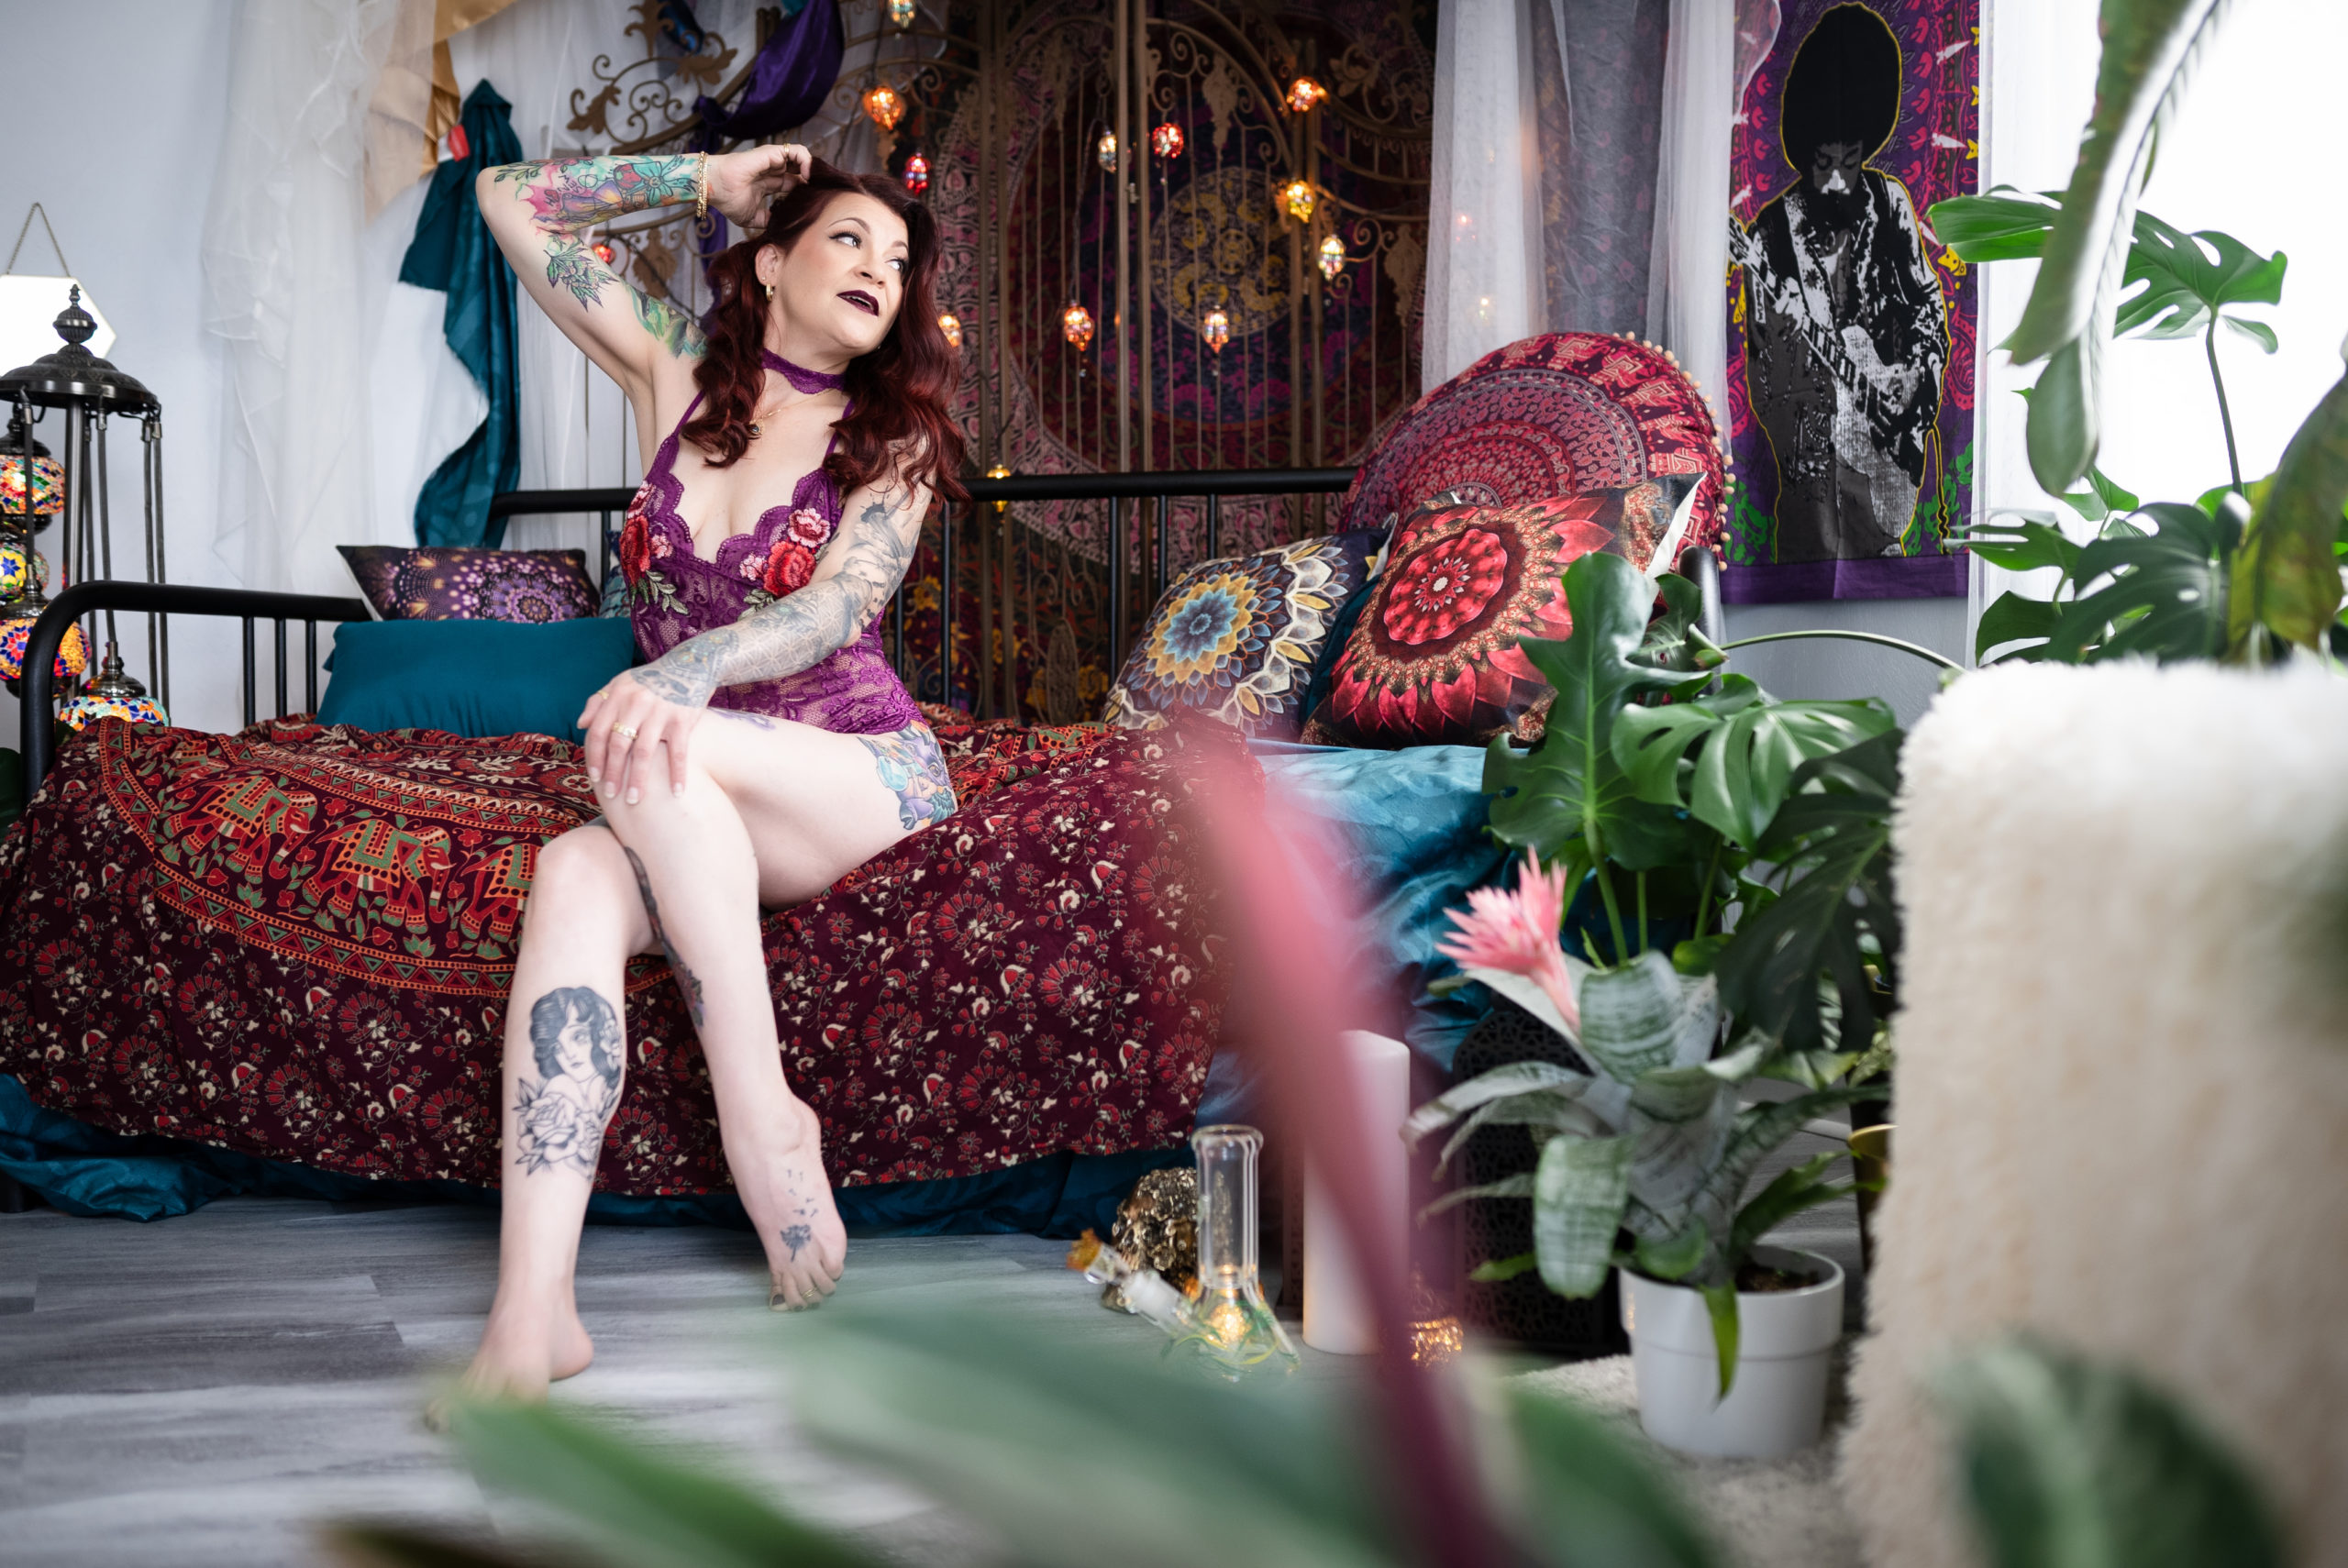 A woman with red hair and tattoos is wearing maroon lingerie while sitting on a bed during a boudoir photoshoot